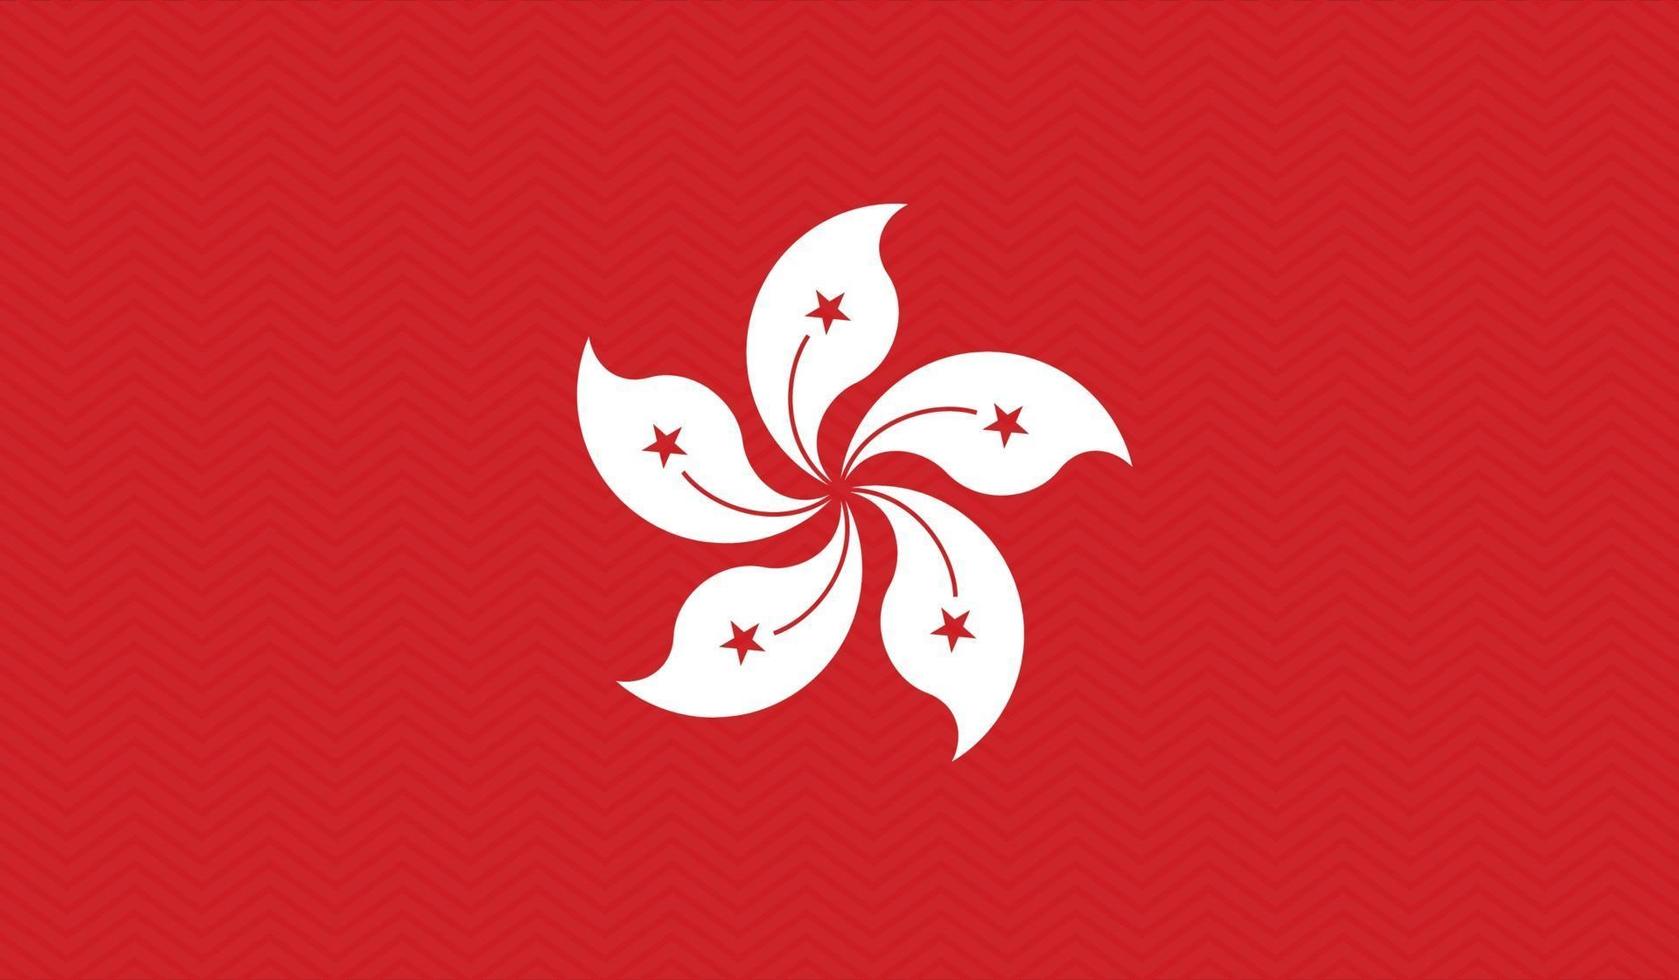 Hong Kong flag in zigzag style pattern vector illustration.